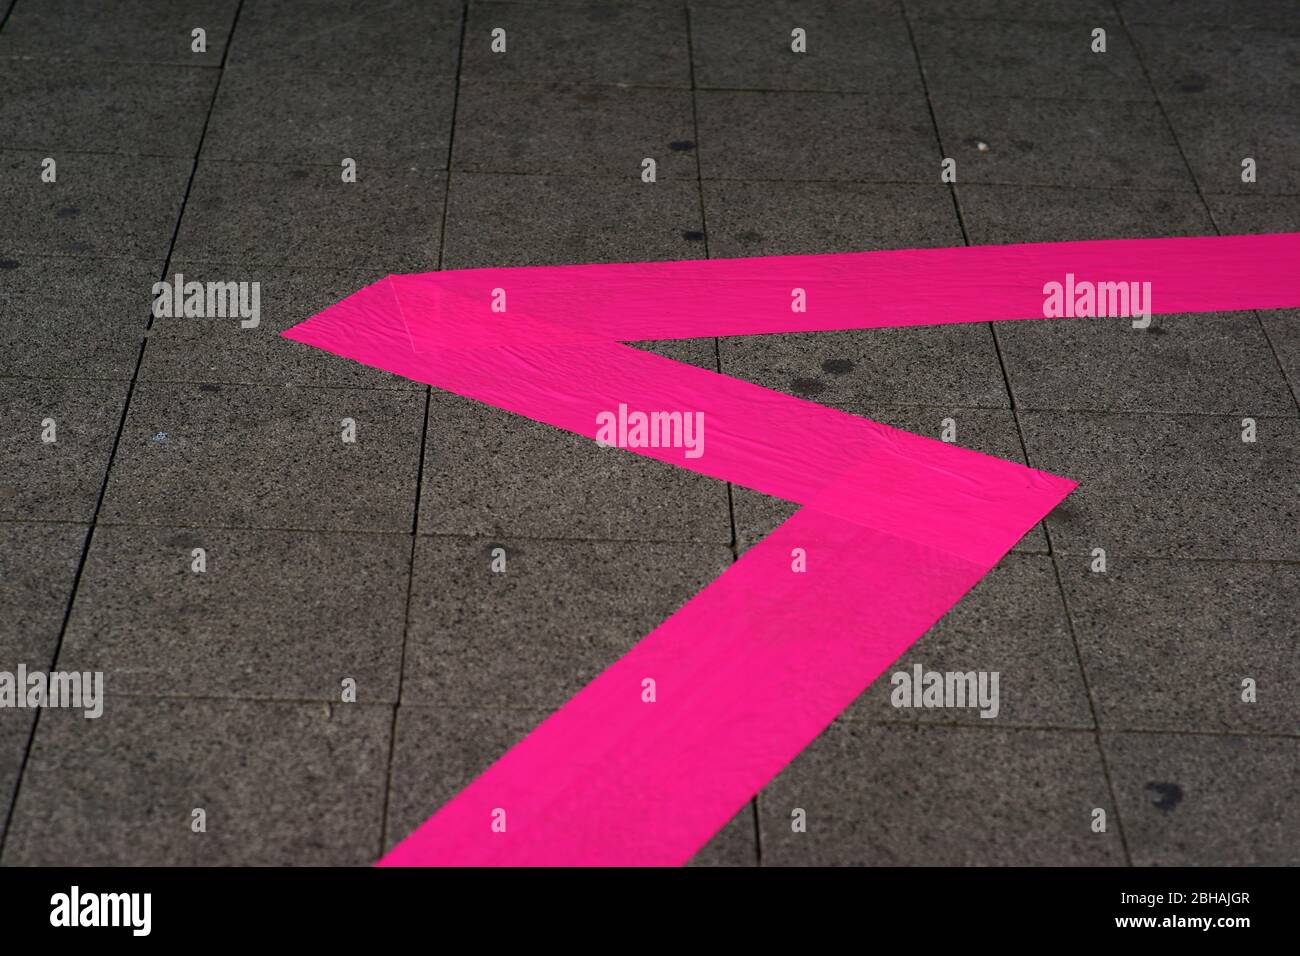 A neon flash sidewalk marker made from a wide strip of tape to isolate an event. Stock Photo